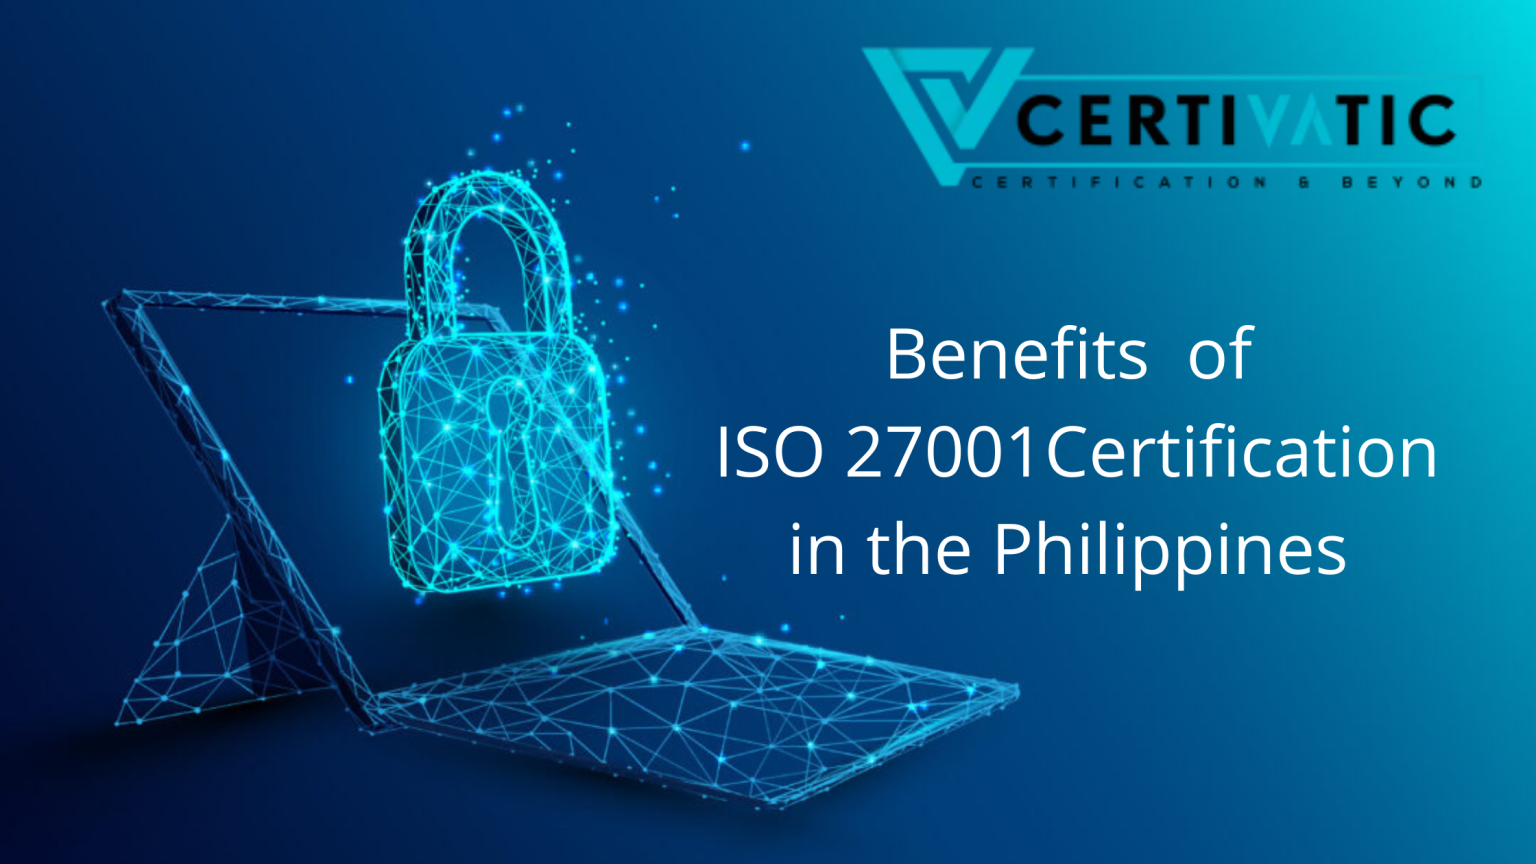 How does ISO 27001 Certification in Philippines Benefits Business? ISO Certification